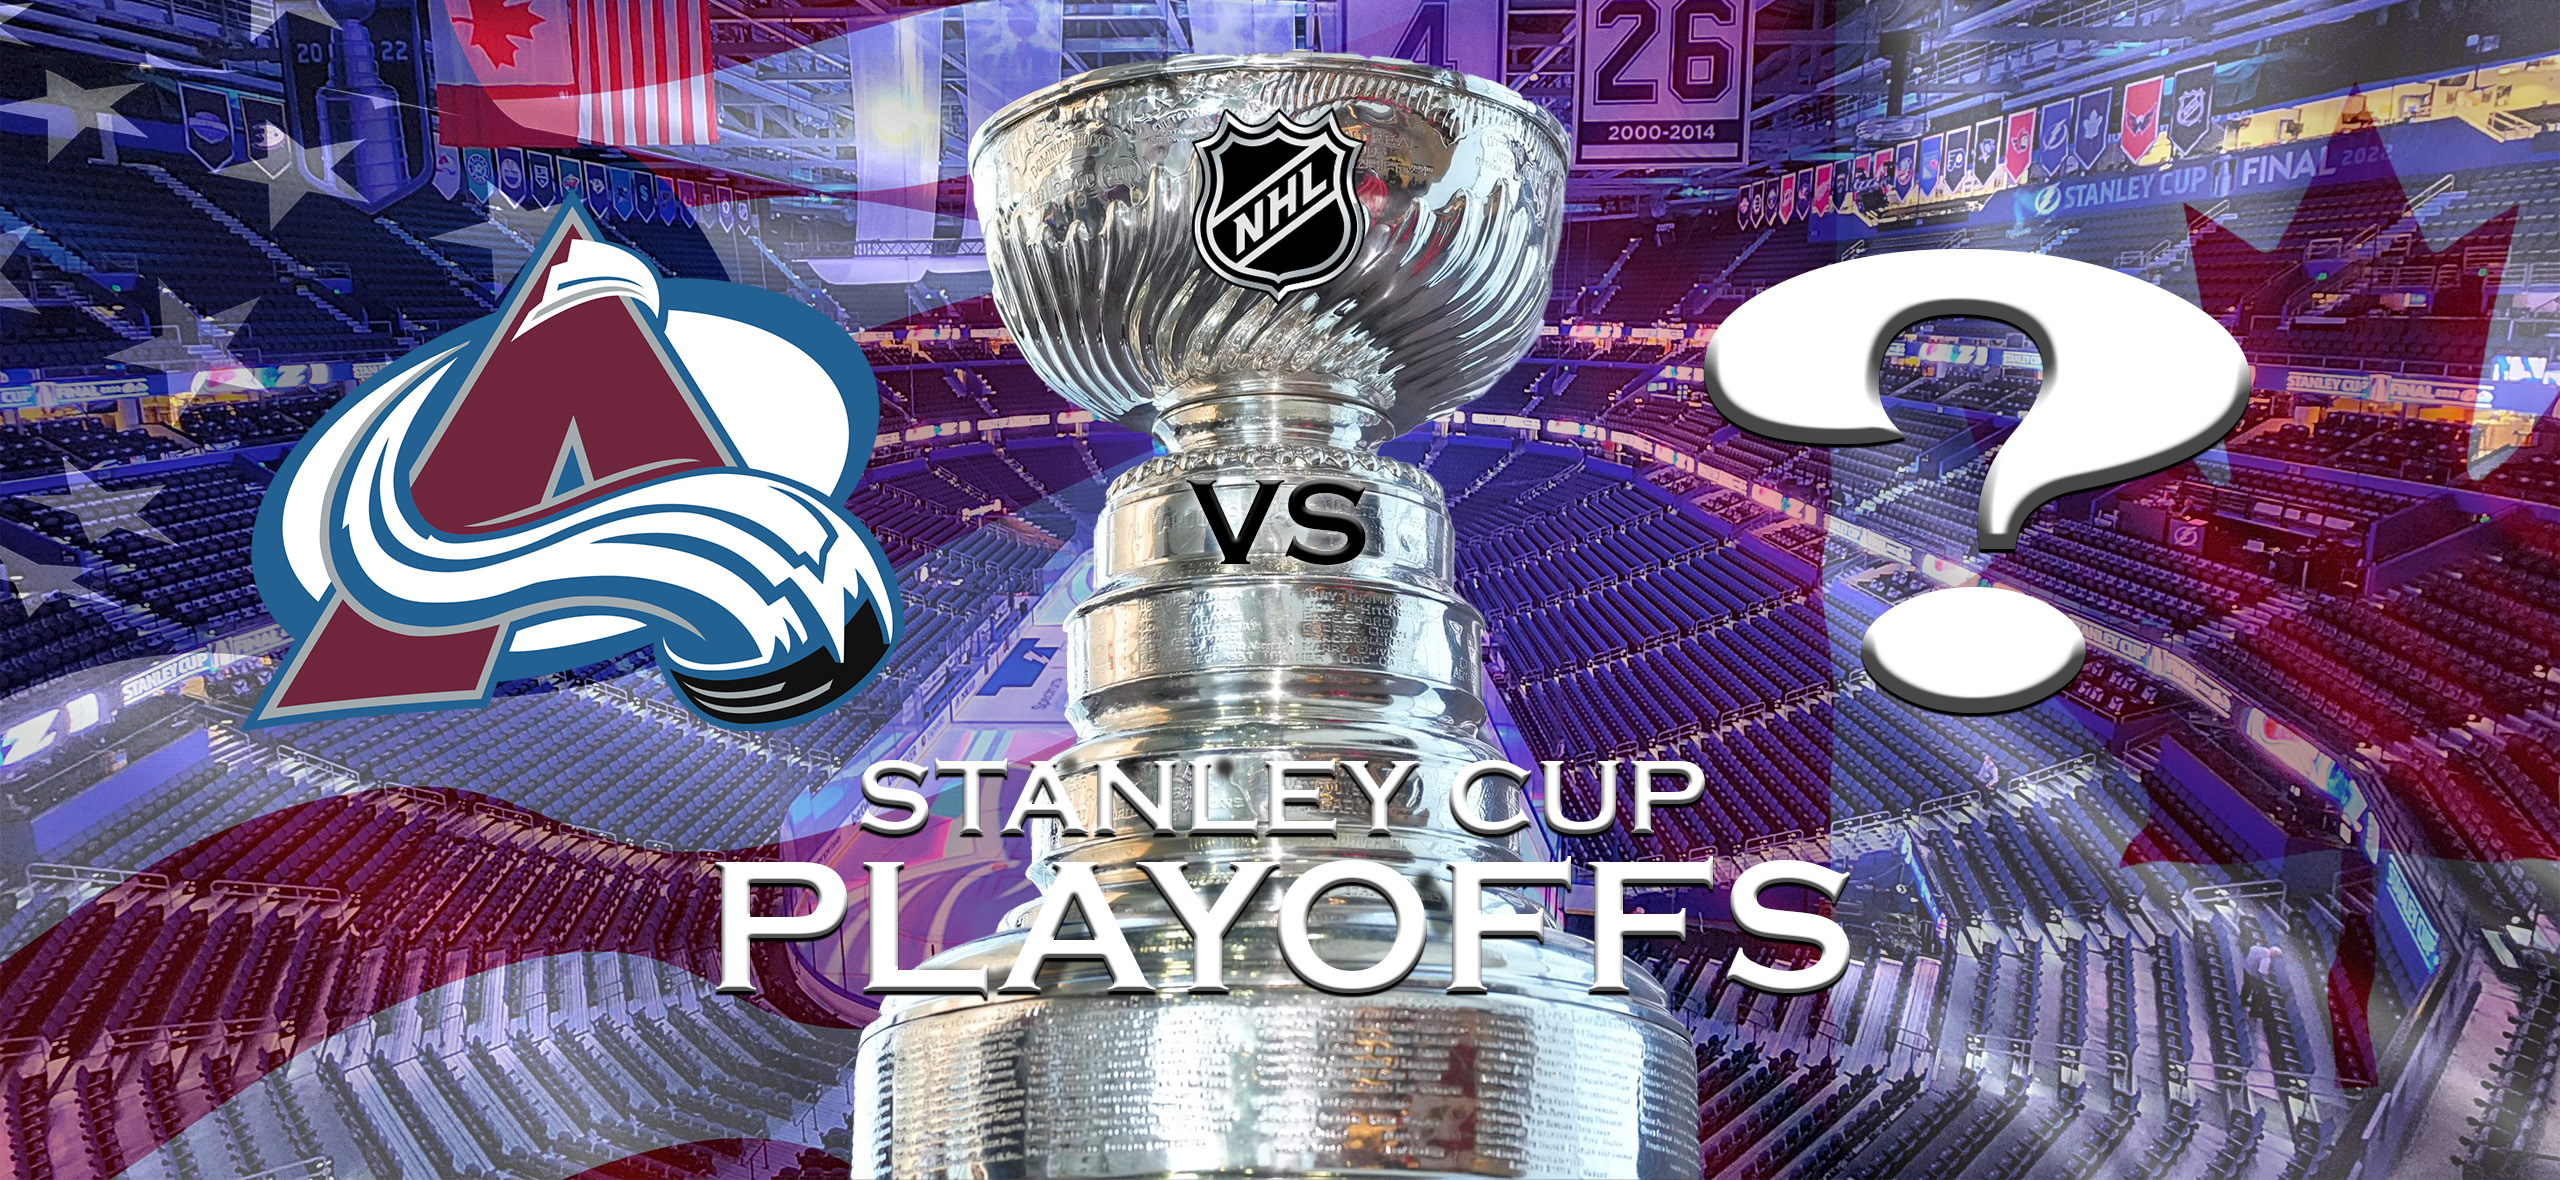 Best Sports Bars To Watch The Stanley Cup Playoffs -